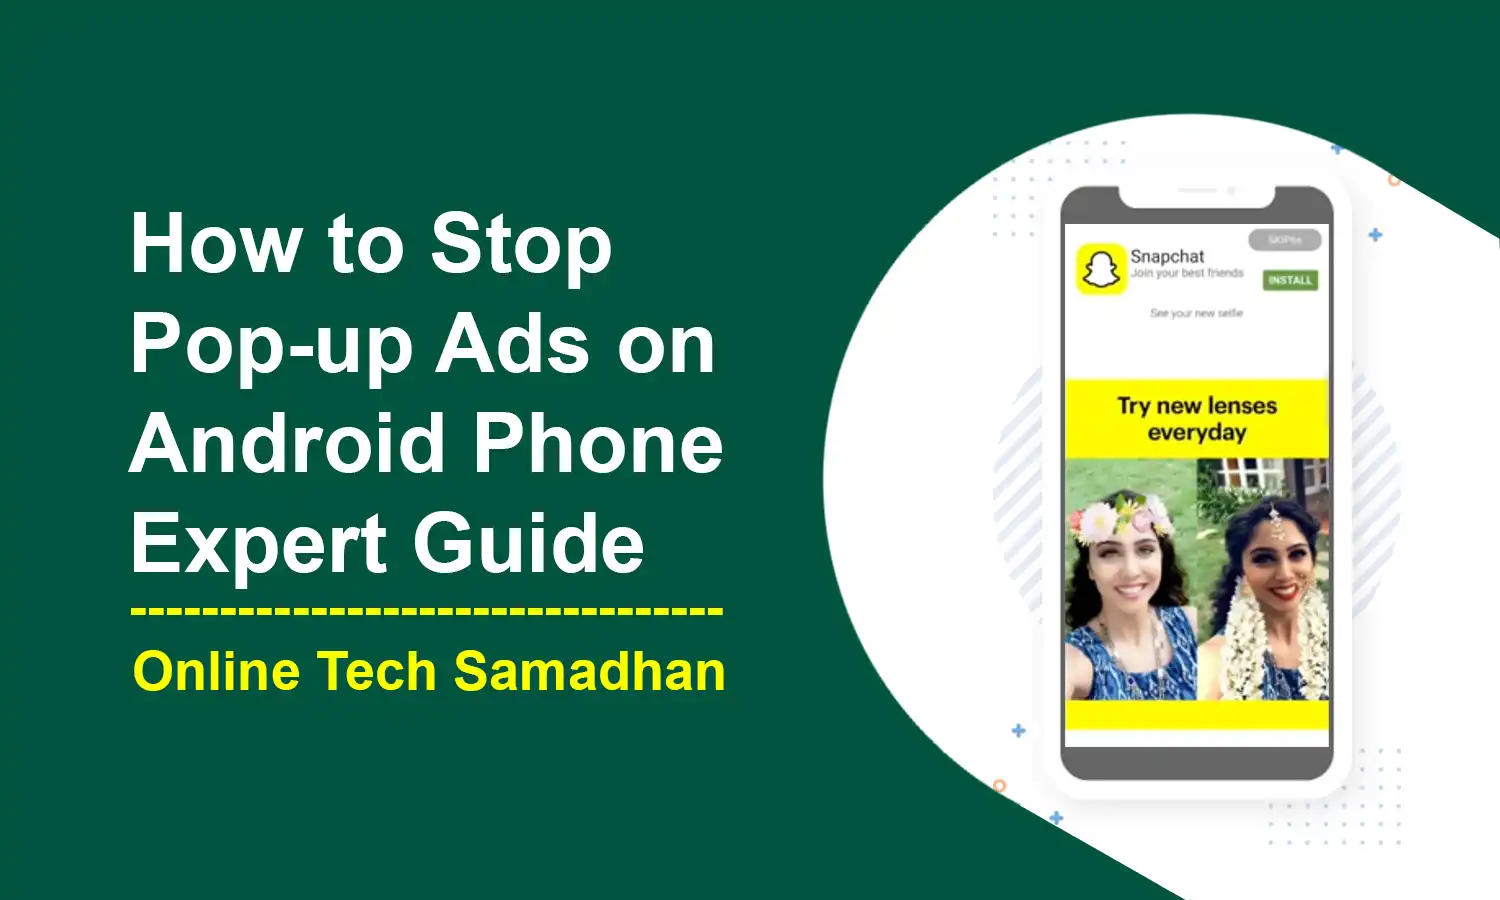 How to Stop Pop-up Ads on Android Phone